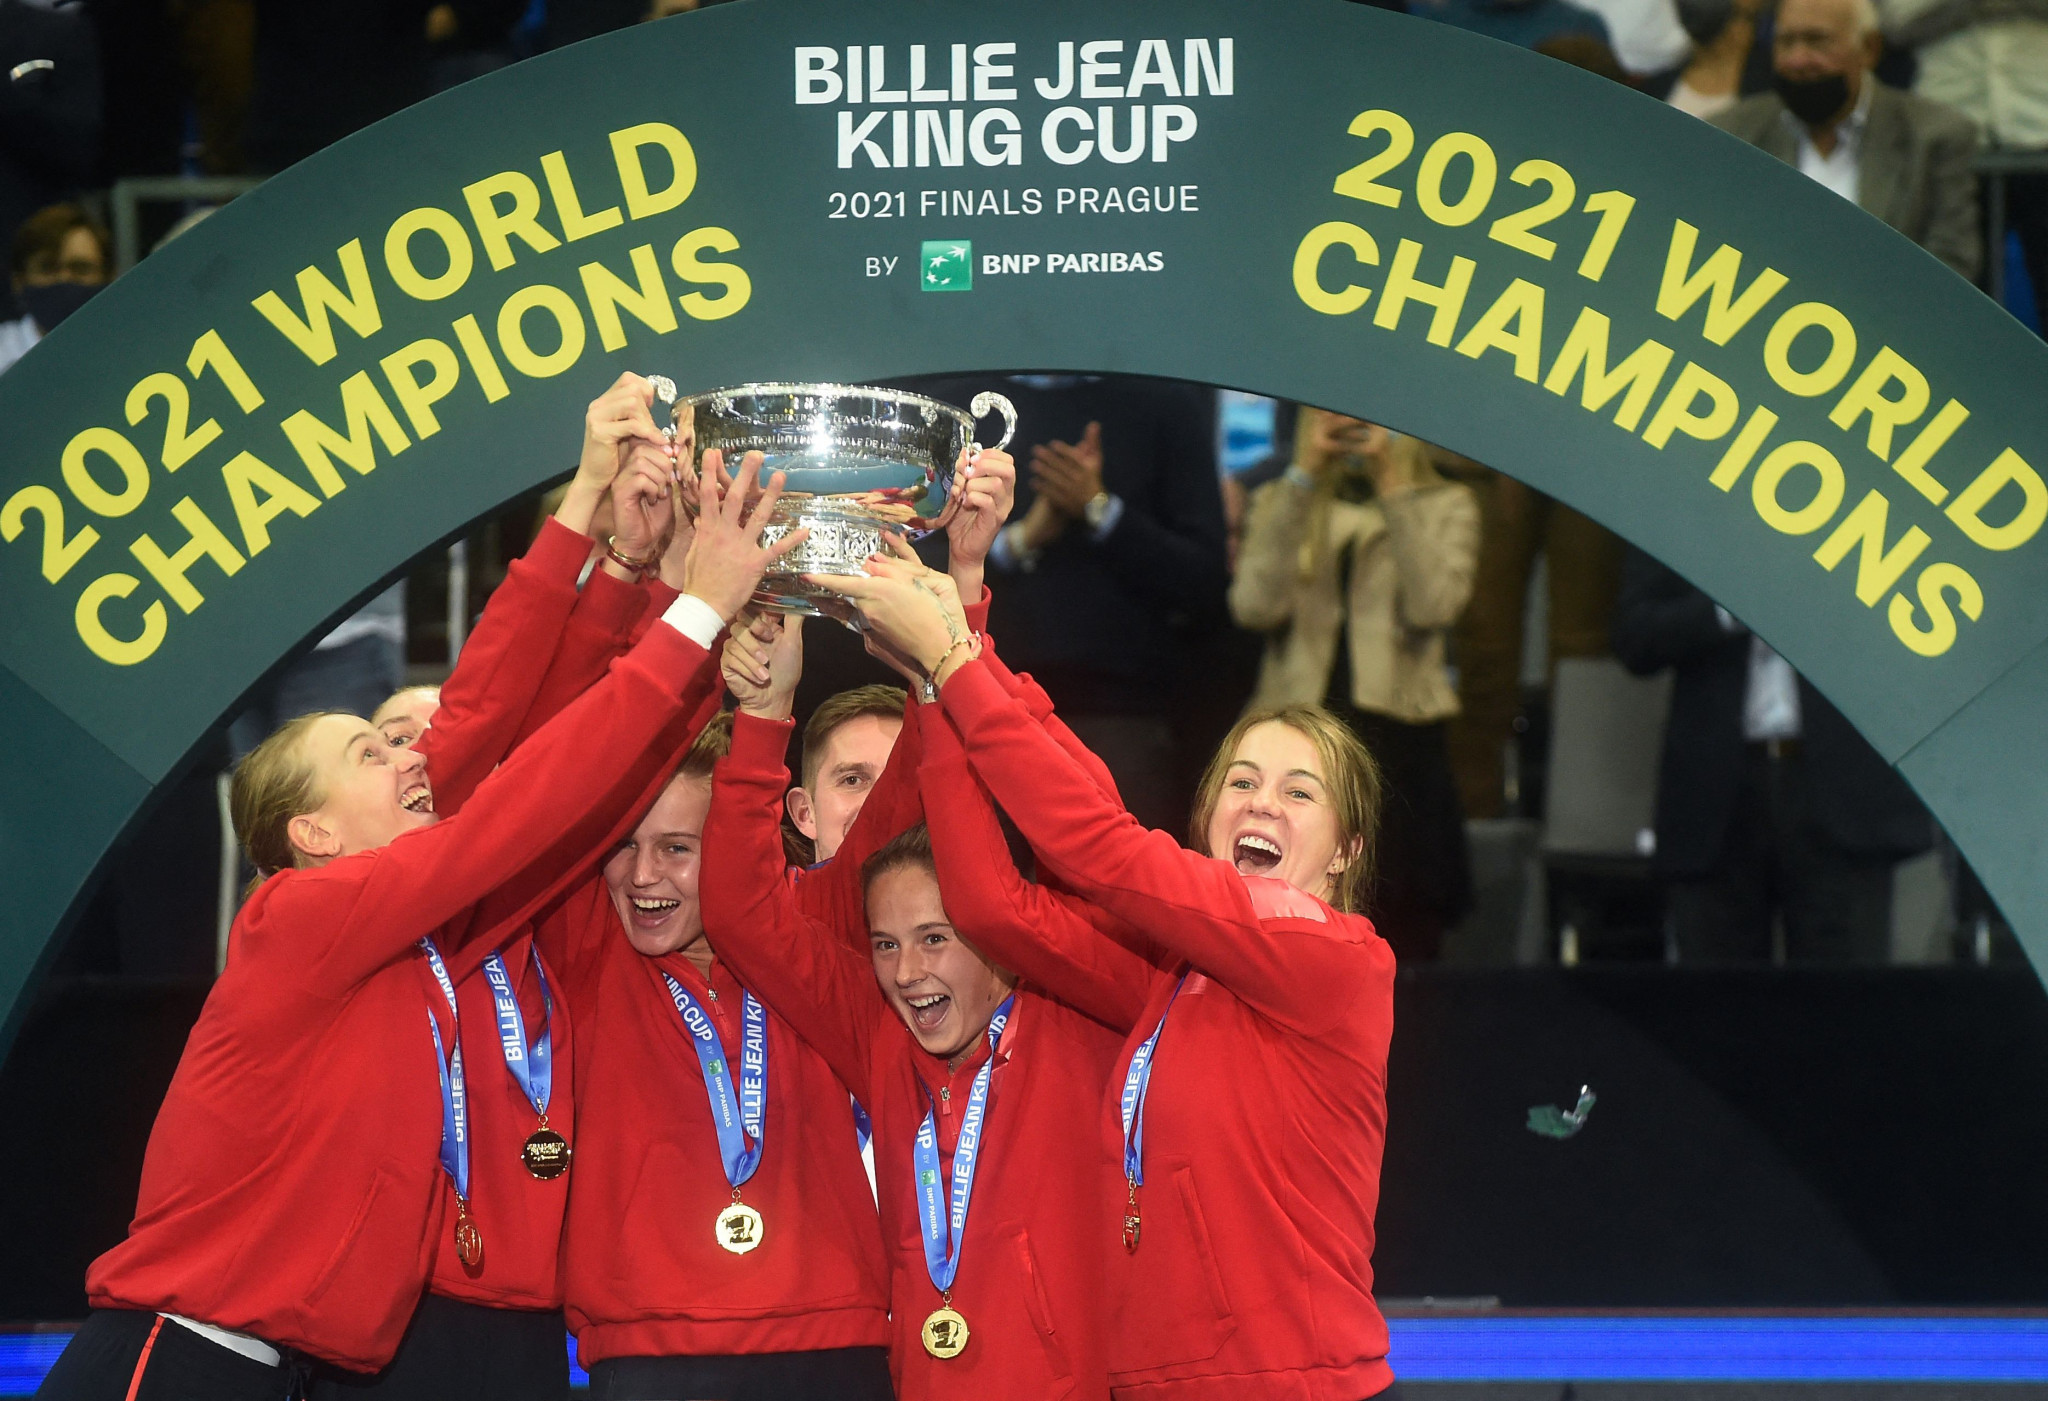 Russia won the 2021 Billie Jean King Cup at the O2 Arena in Prague, Czech Republic ©Getty Images

